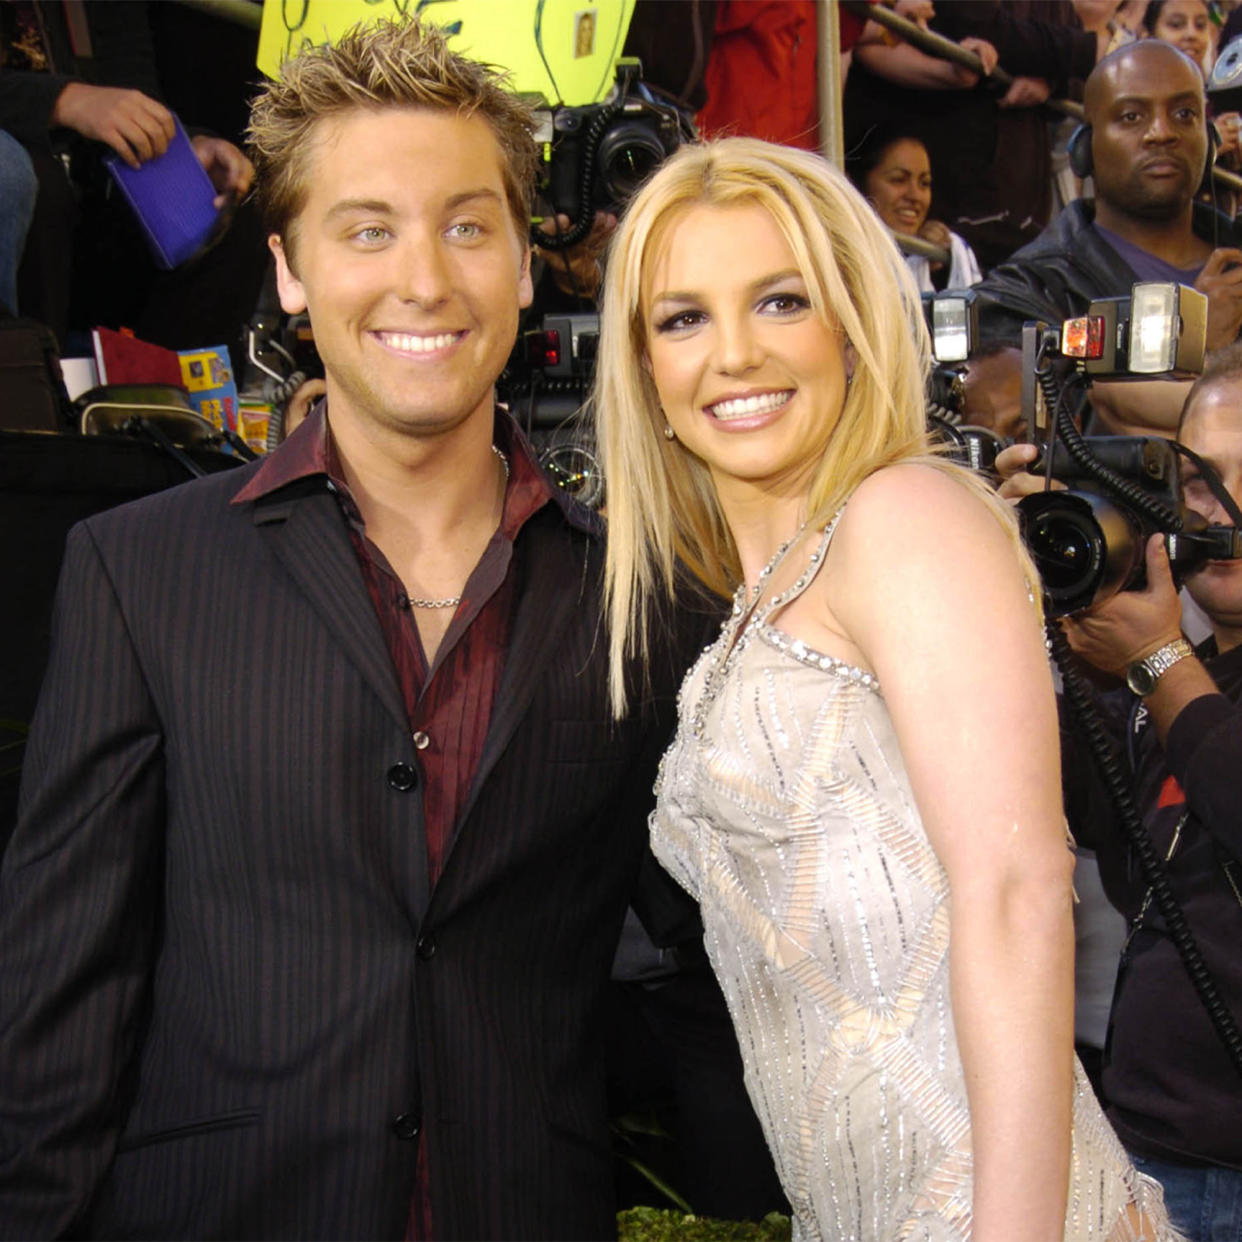 Lance Bass and Britney Spears smile on a red carpet. Bass is in a black suit with a red button-down shirt and Spears is in a sparkly, white gown (KMazur / WireImage)